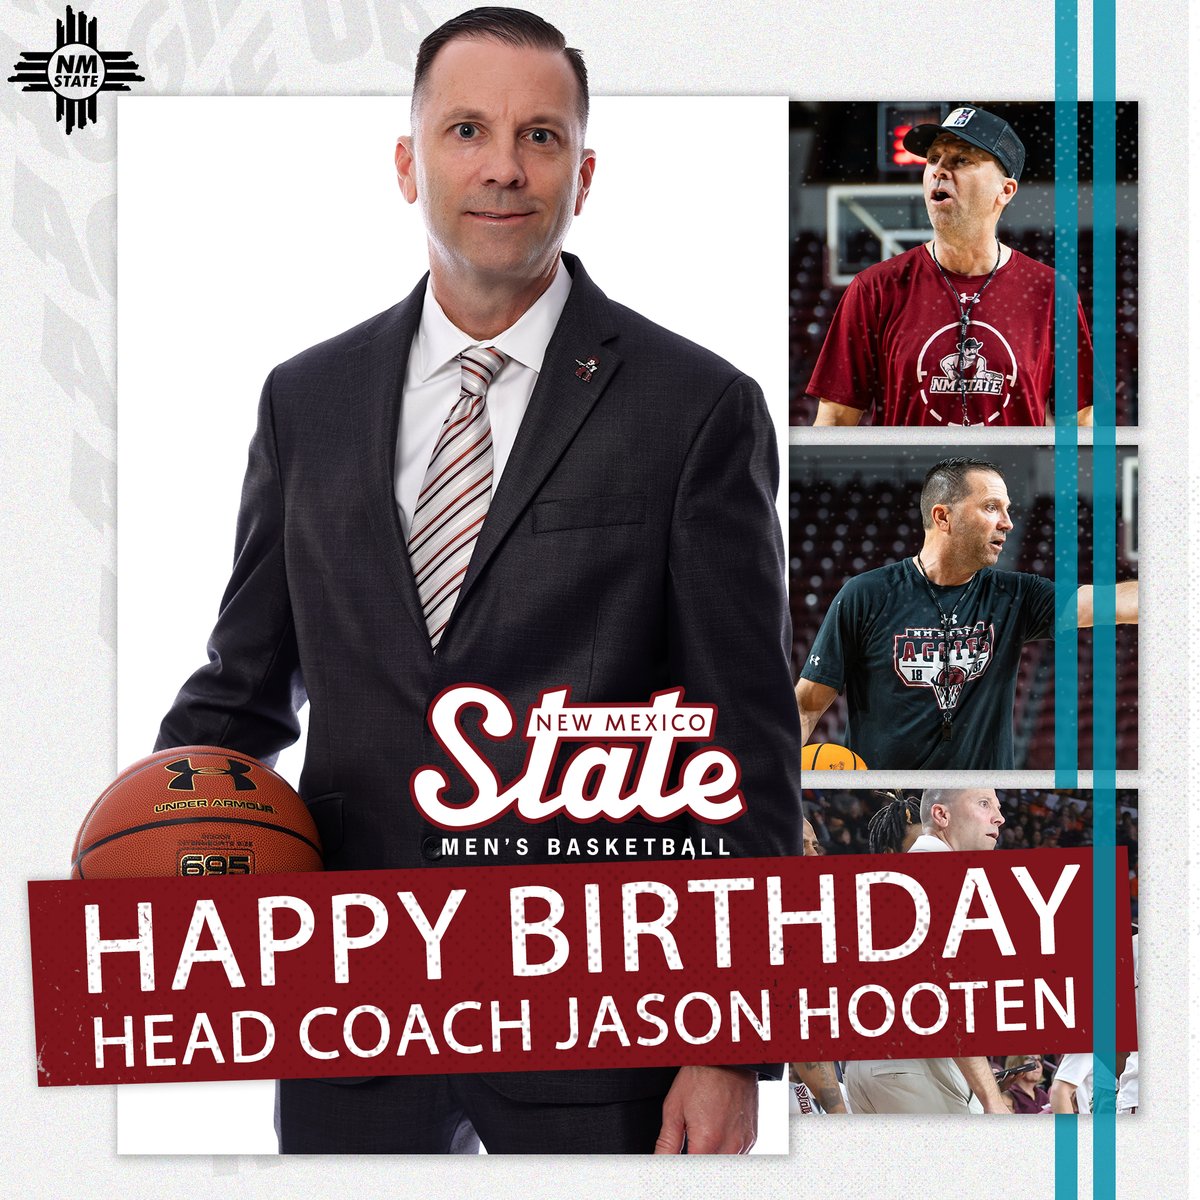 𝗛𝗮𝗽𝗽𝘆 𝗕𝗶𝗿𝘁𝗵𝗱𝗮𝘆 𝗖𝗼𝗮𝗰𝗵 𝗛𝗼𝗼𝘁𝗲𝗻 🎂 ✨Wishing you a great day -- and hope your year is full of success & slurpees 🥤‼️ #AggieUp | #HBD